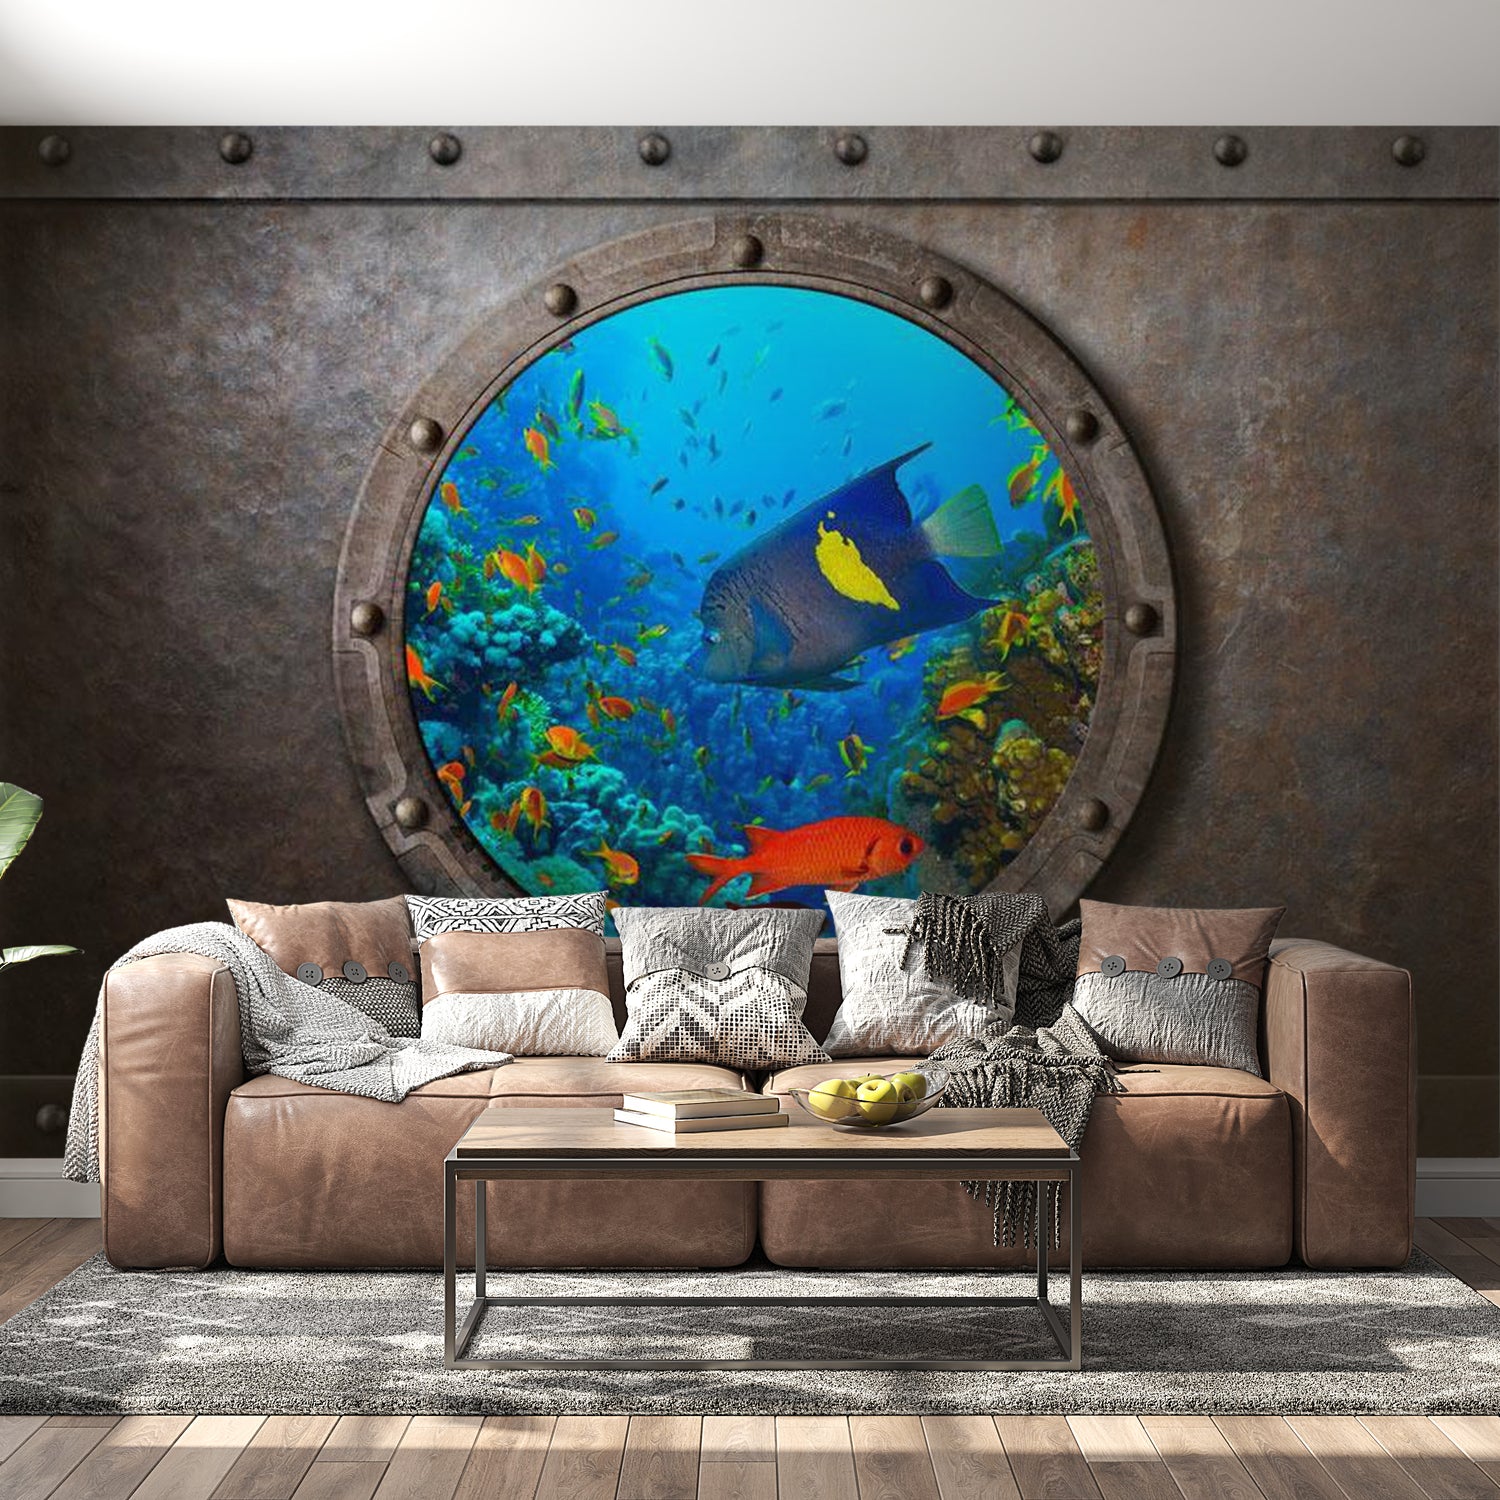 Peel & Stick Animal Wall Mural - Submarine Window - Removable Wall Decals